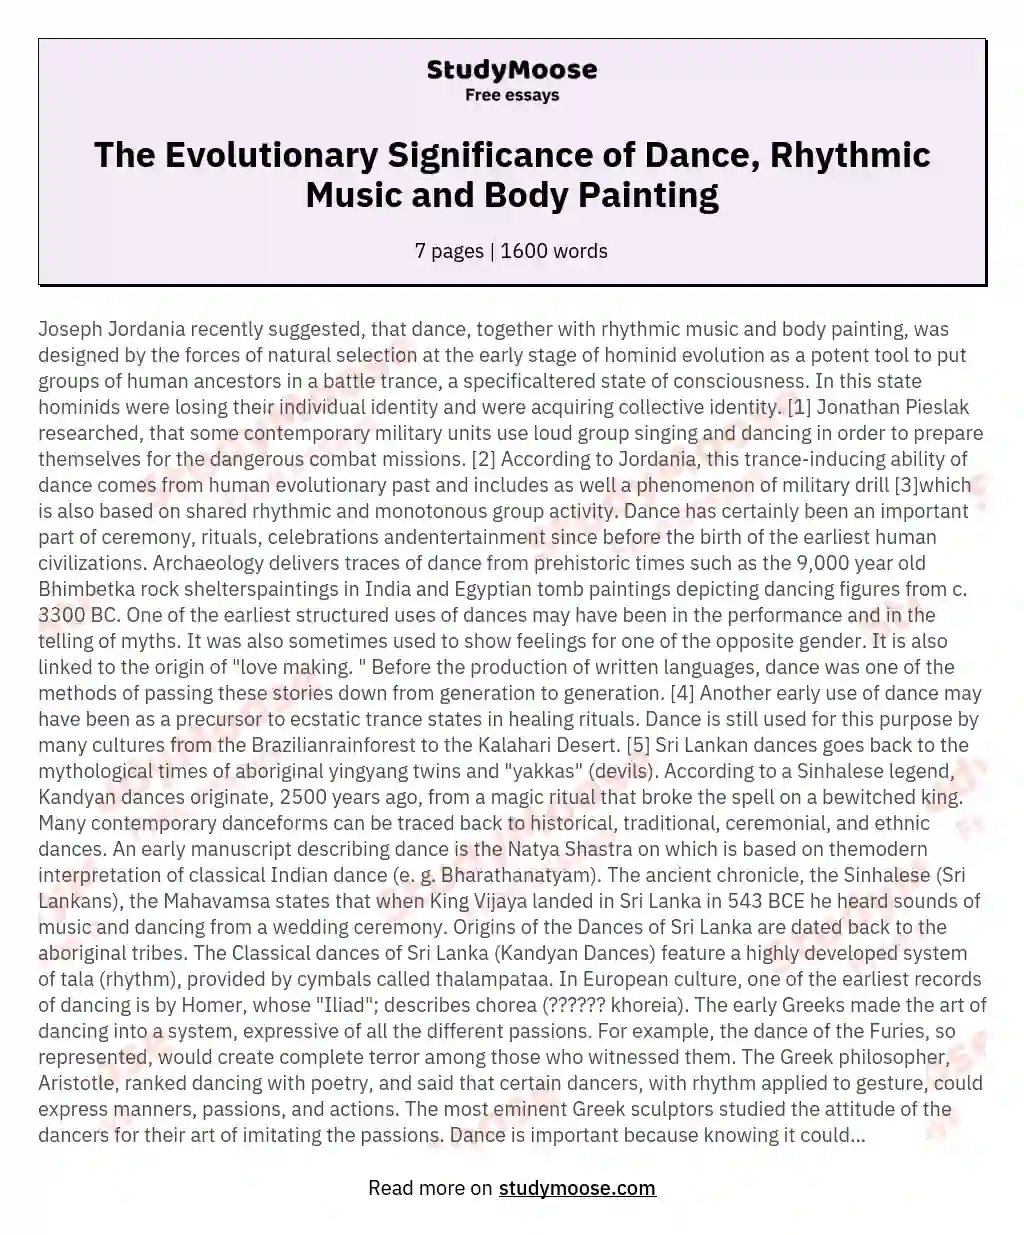 The Evolutionary Significance of Dance, Rhythmic Music and Body Painting essay